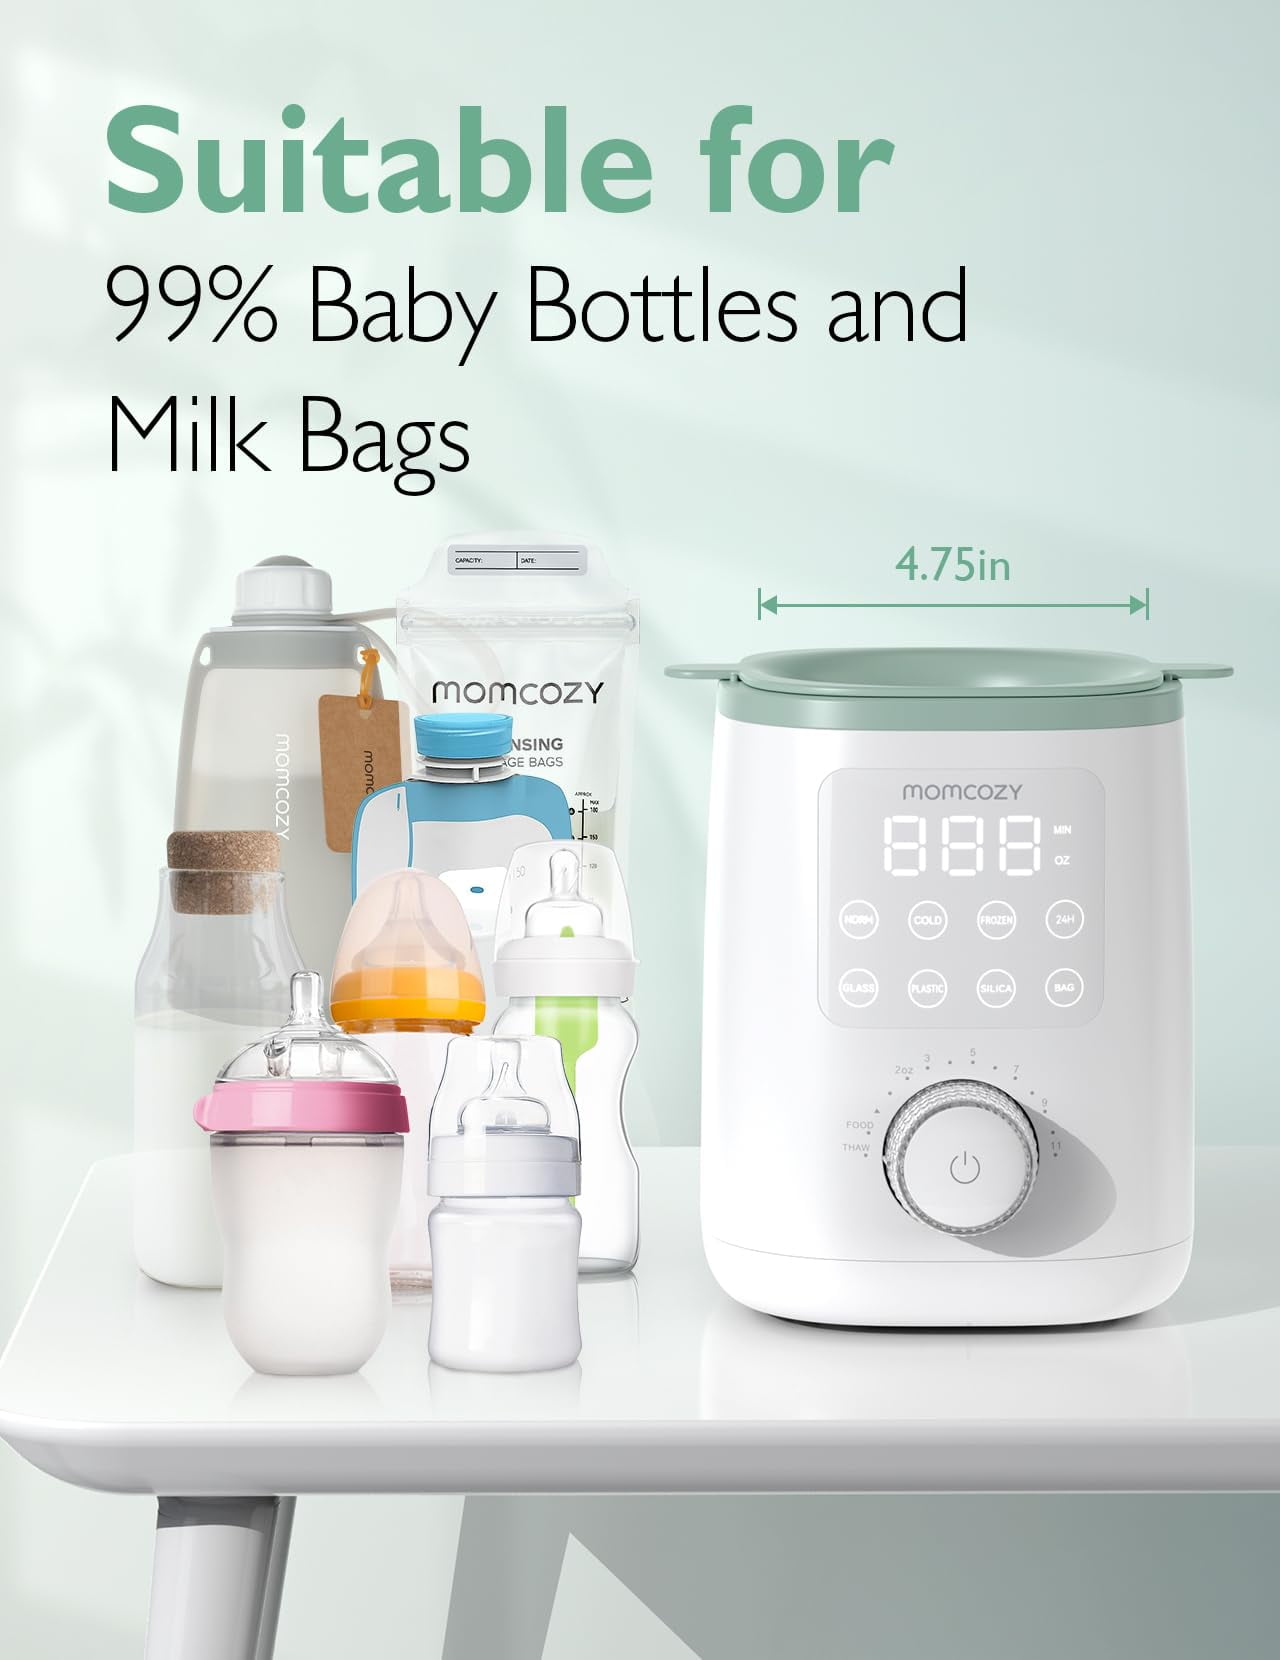 Momcozy on Instagram: Do you know that Momcozy has this portable bottle  warmer that allows you to heat up the milk while on the move? 😍 Keep your  baby's milk at the